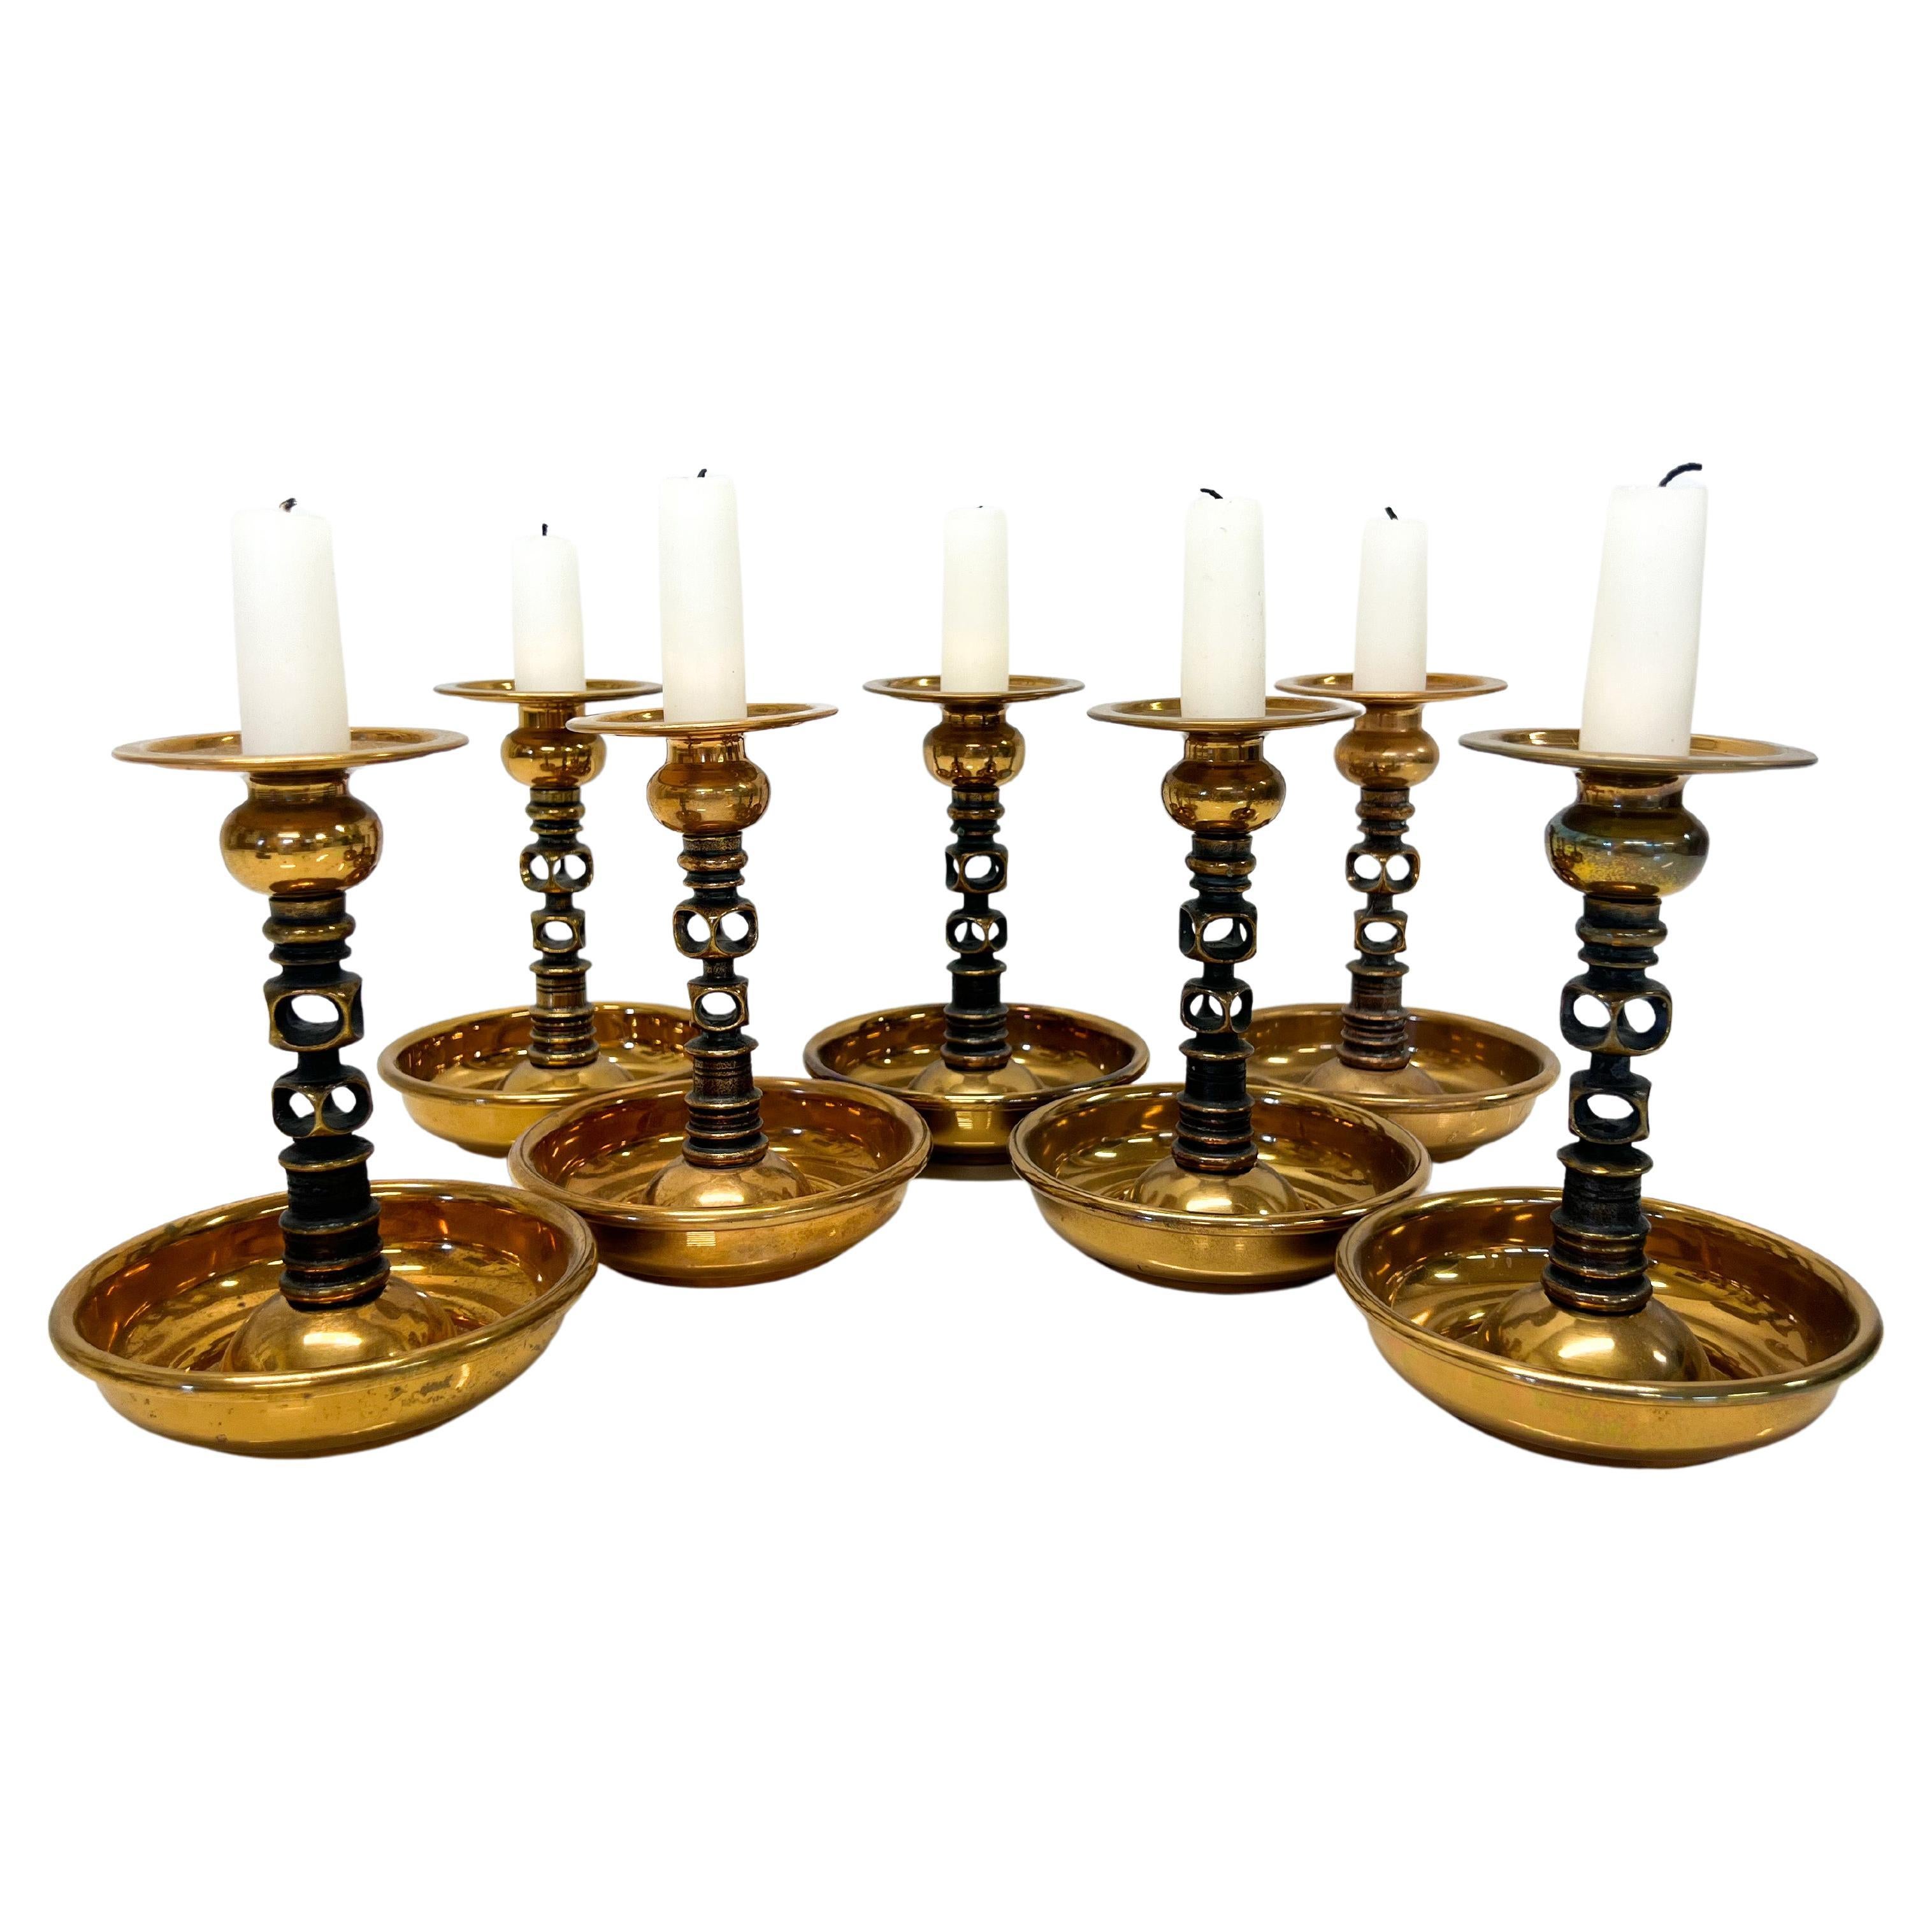 Abstract Candle Holder Jorma Laine Turun Hopea Finland 7pcs. Brass For Sale